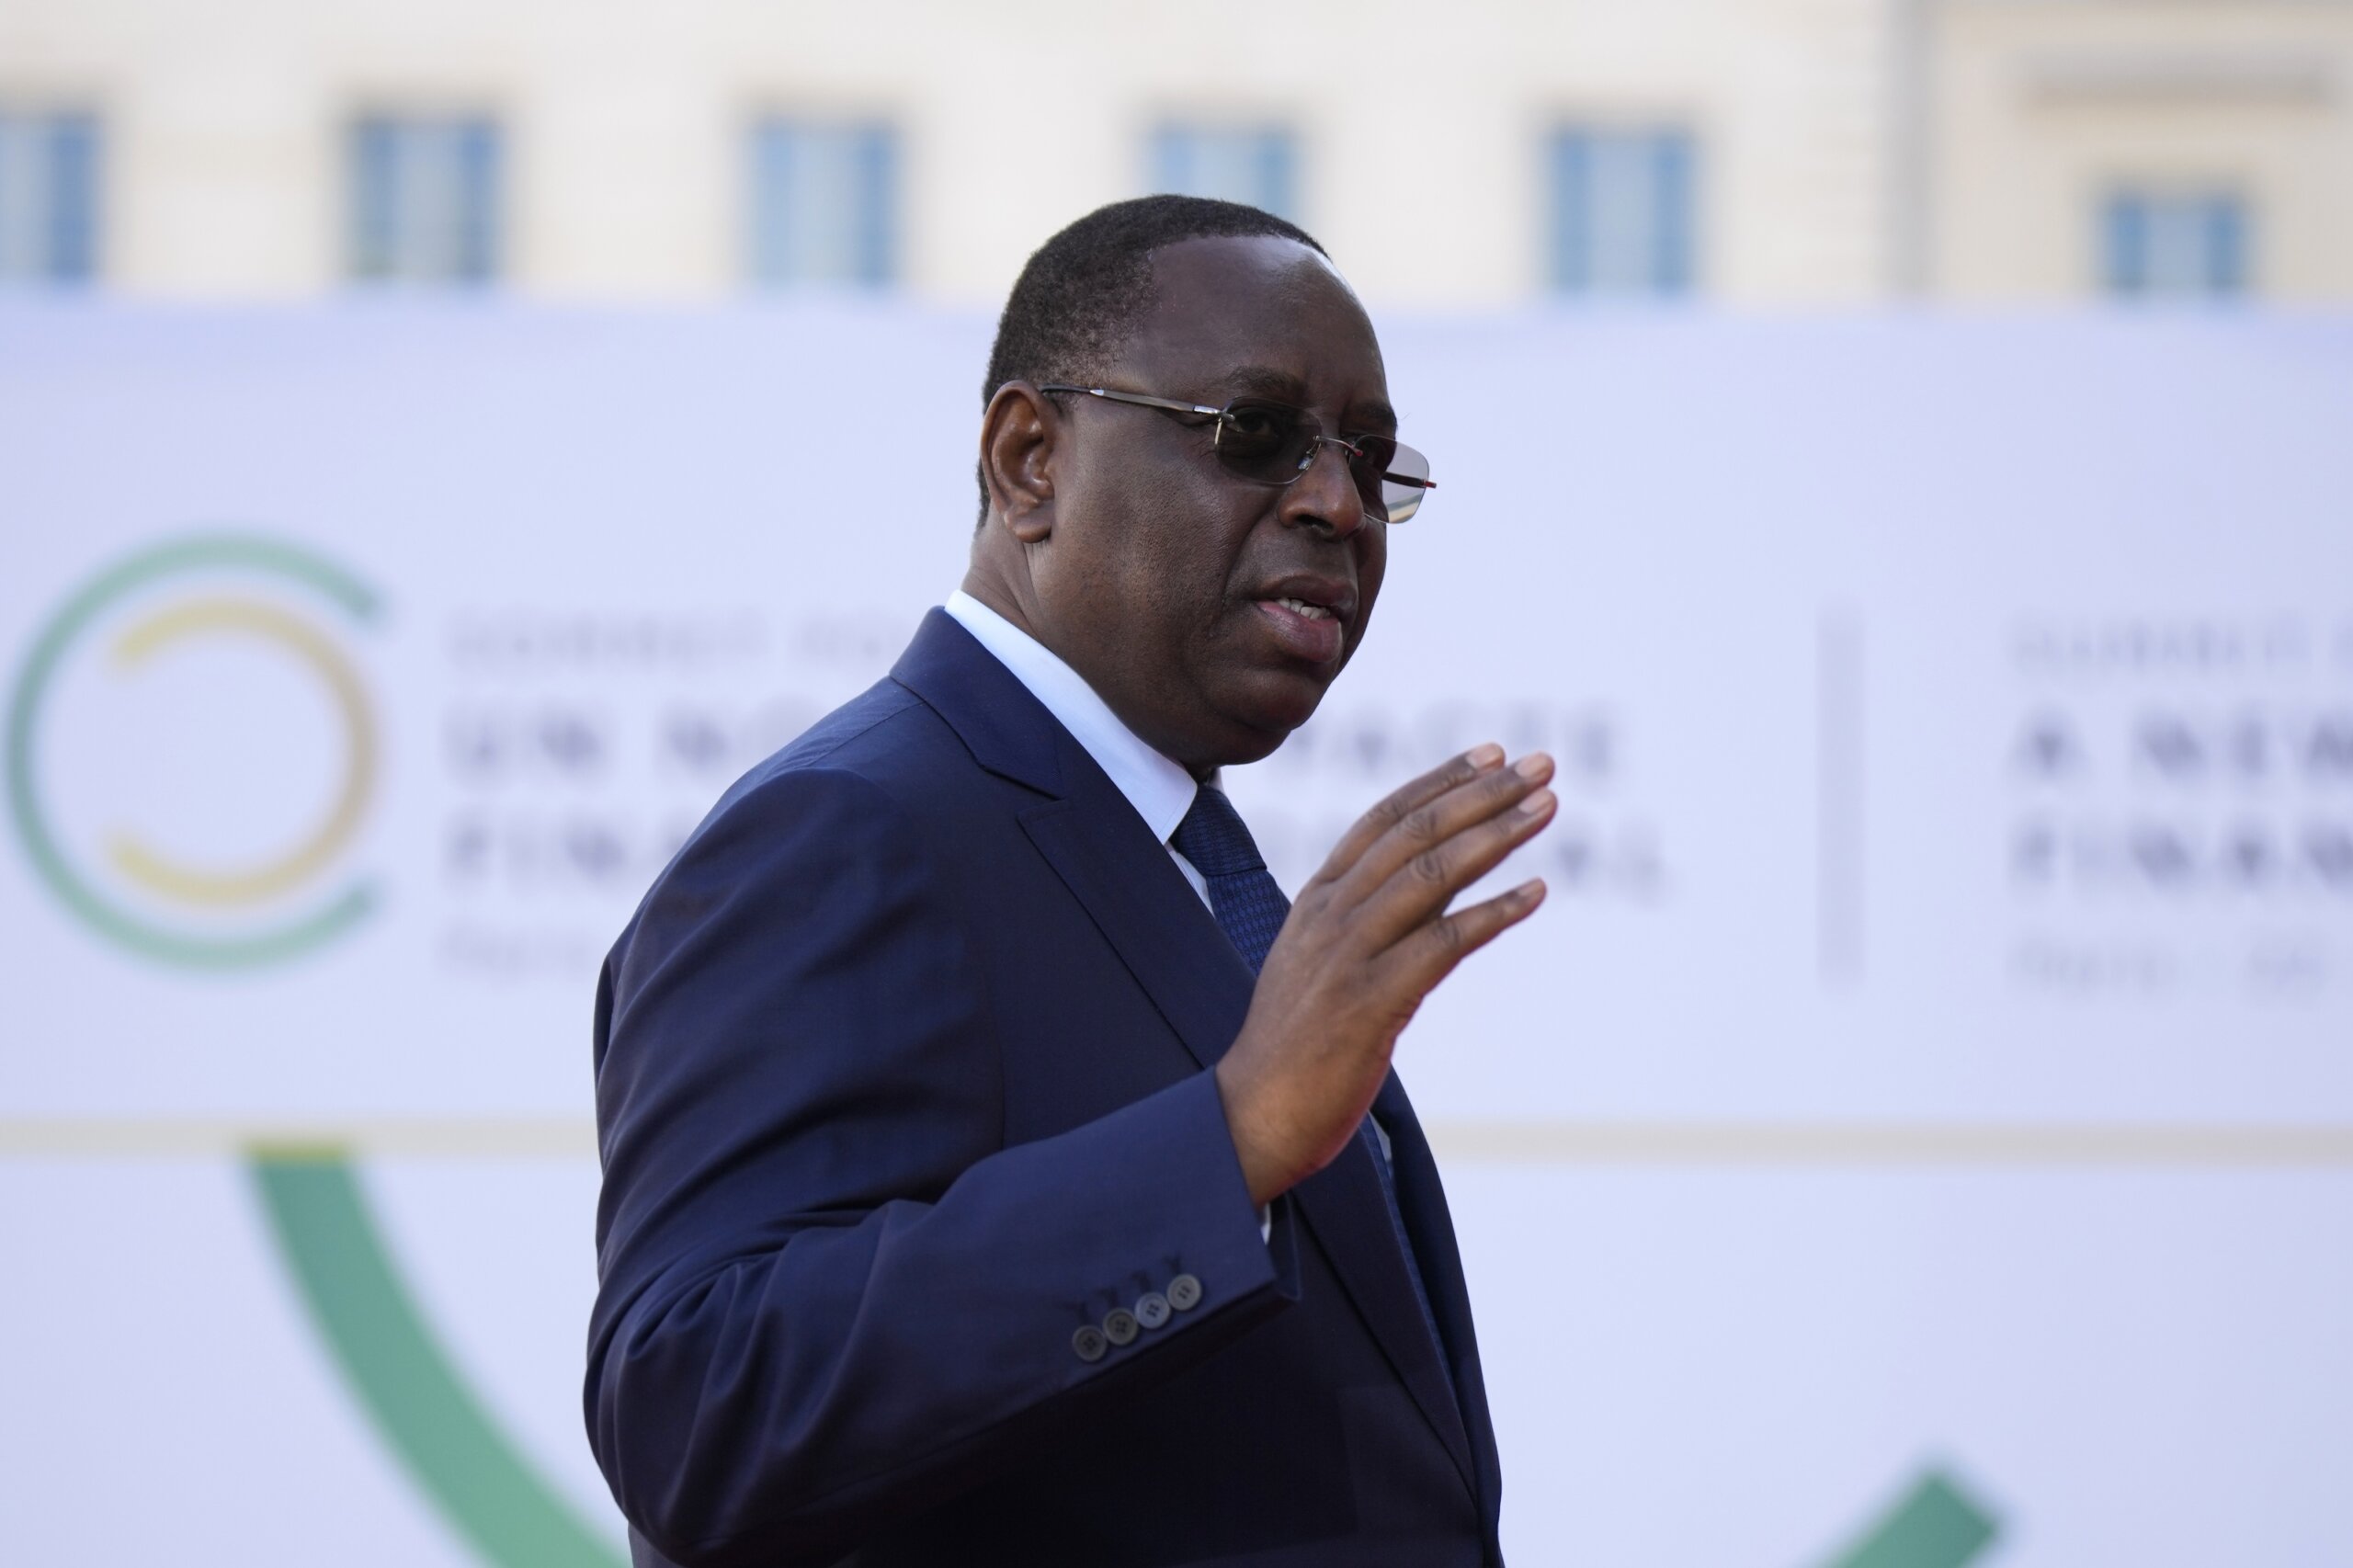 Senegalese President Macky Sall says he won’t seek a third term in 2024